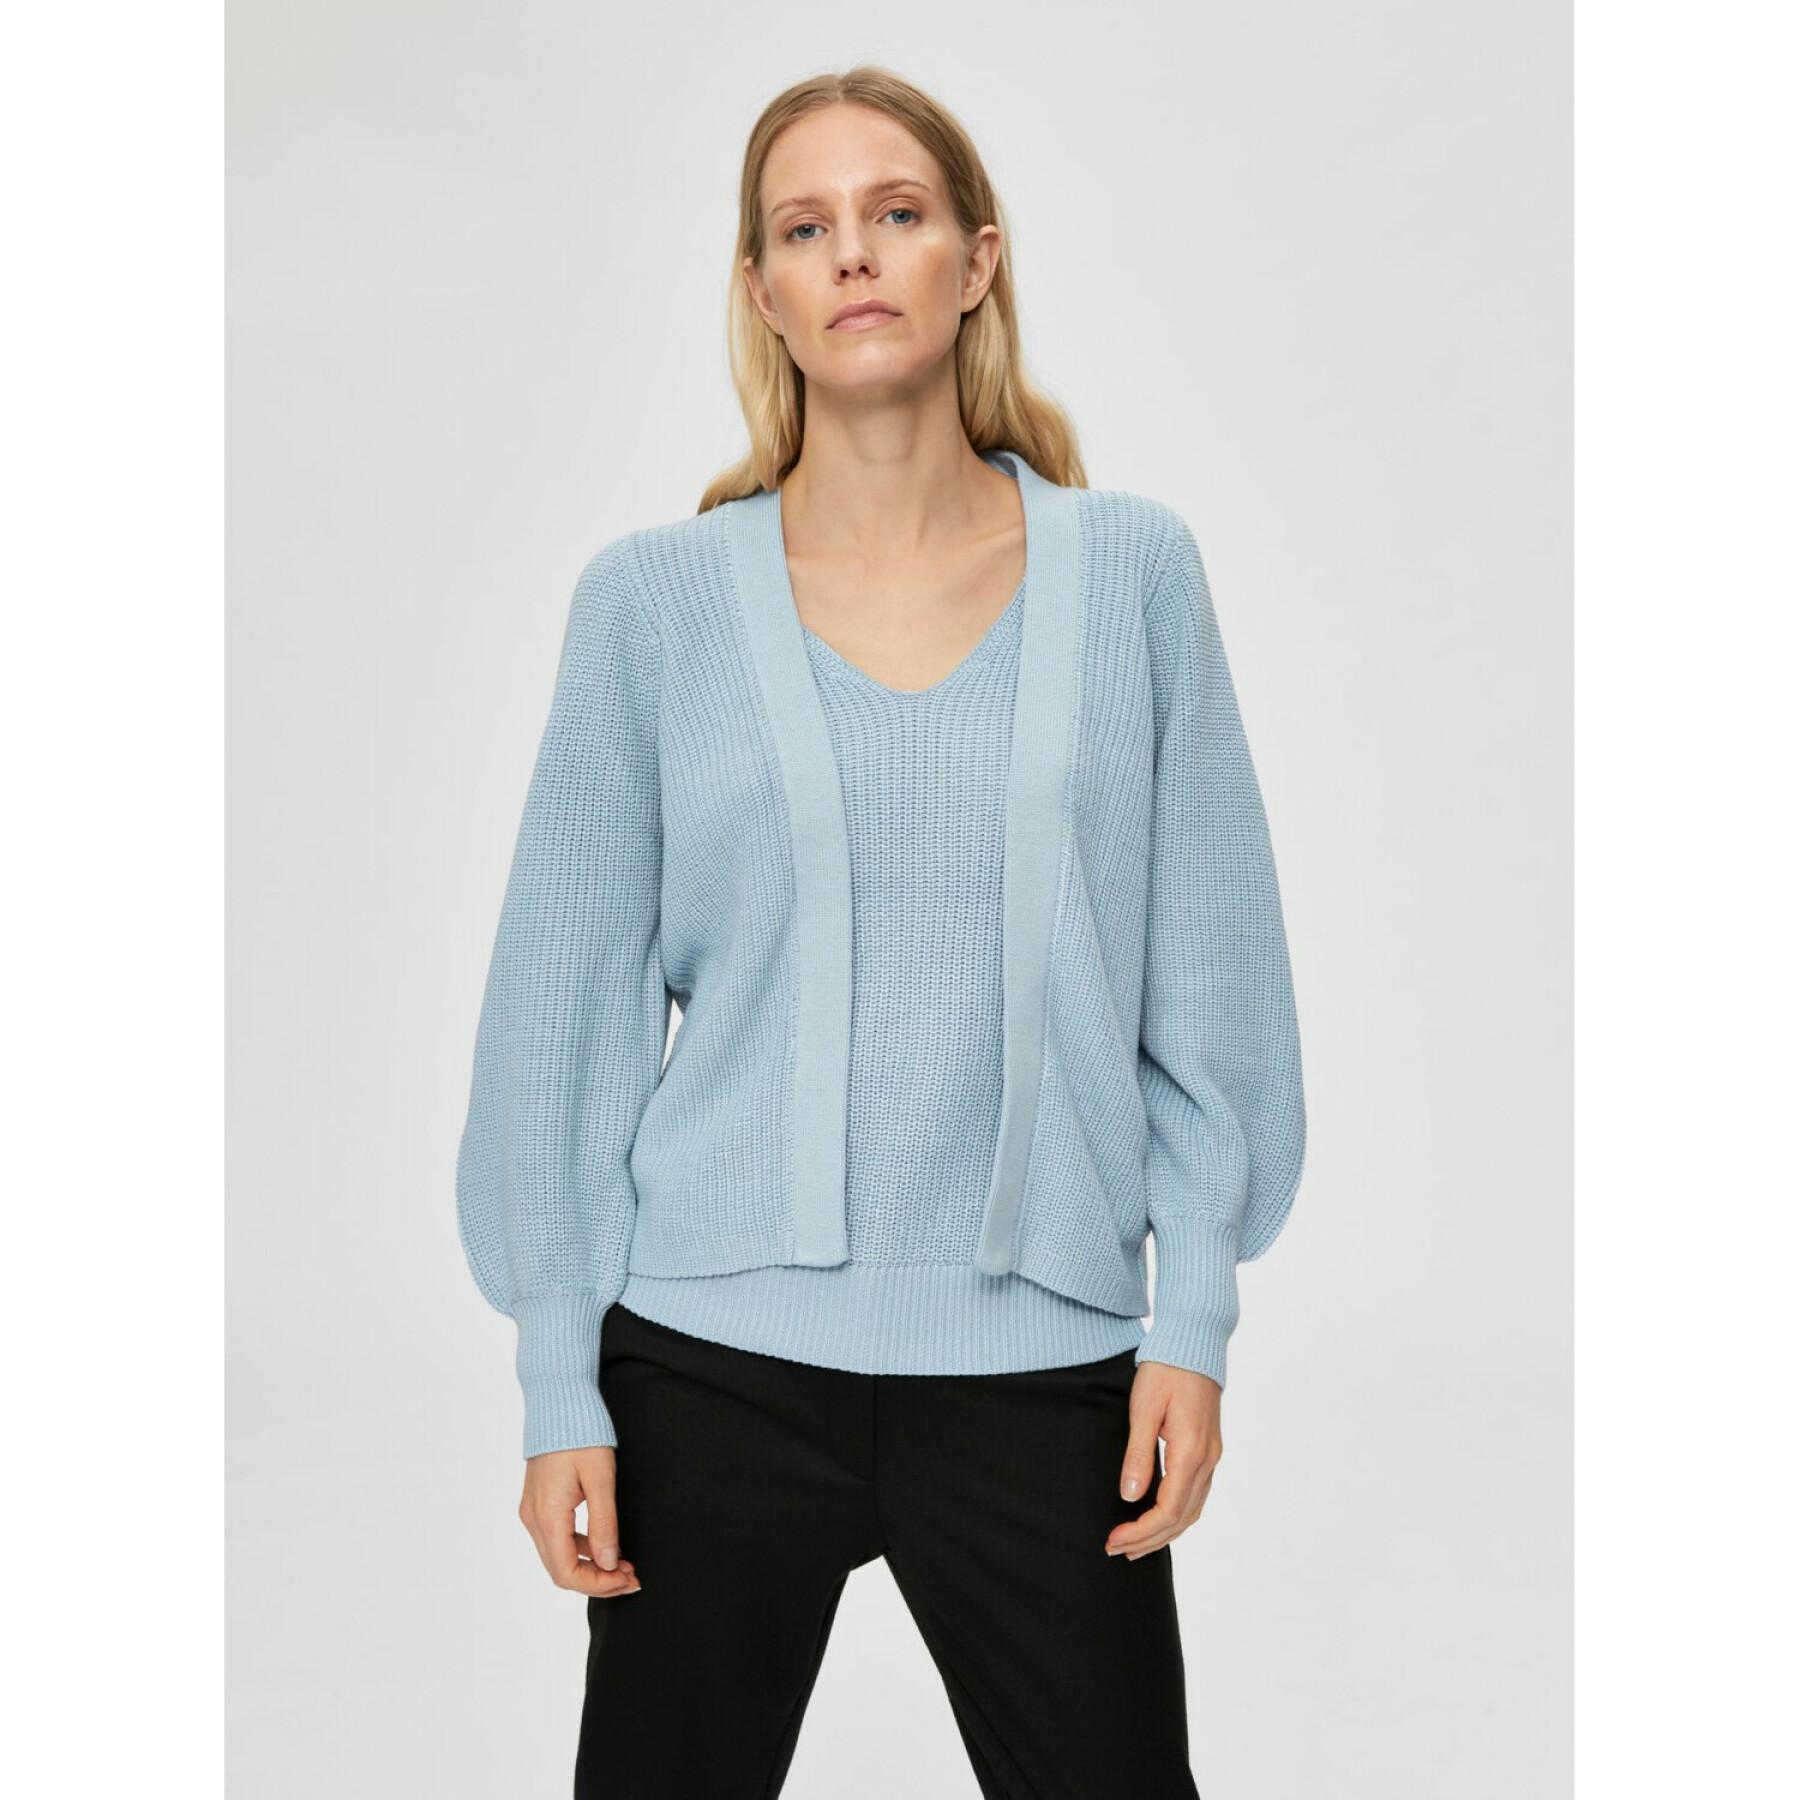 Women's cardigan Selected Emmy